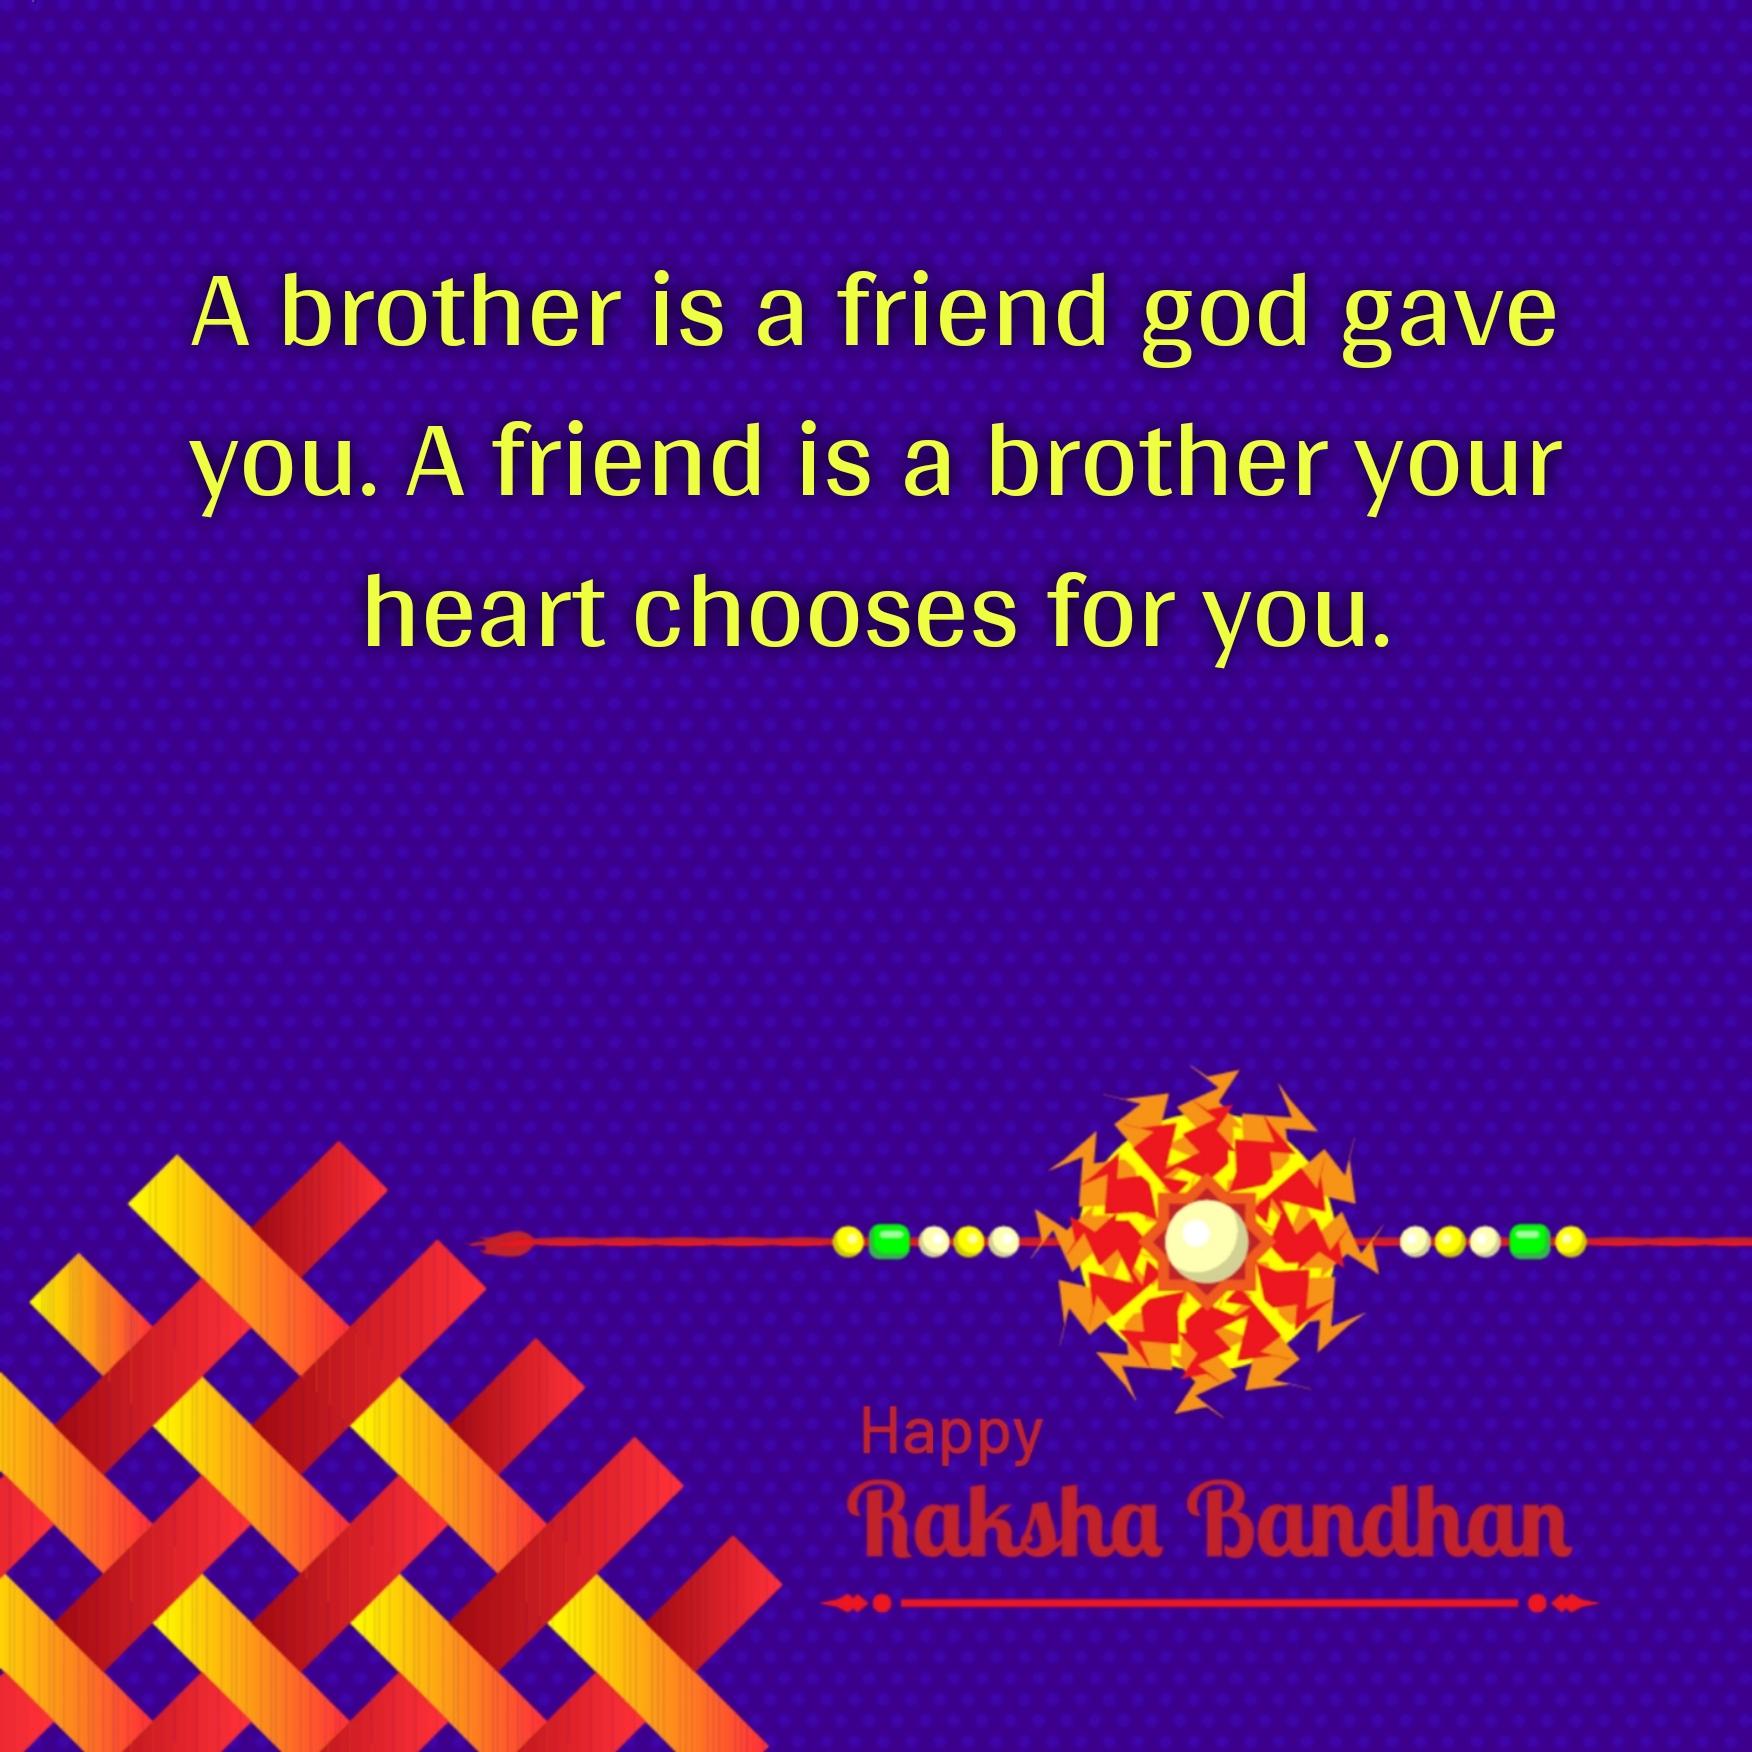 A brother is a friend god gave you A friend is a brother your heart